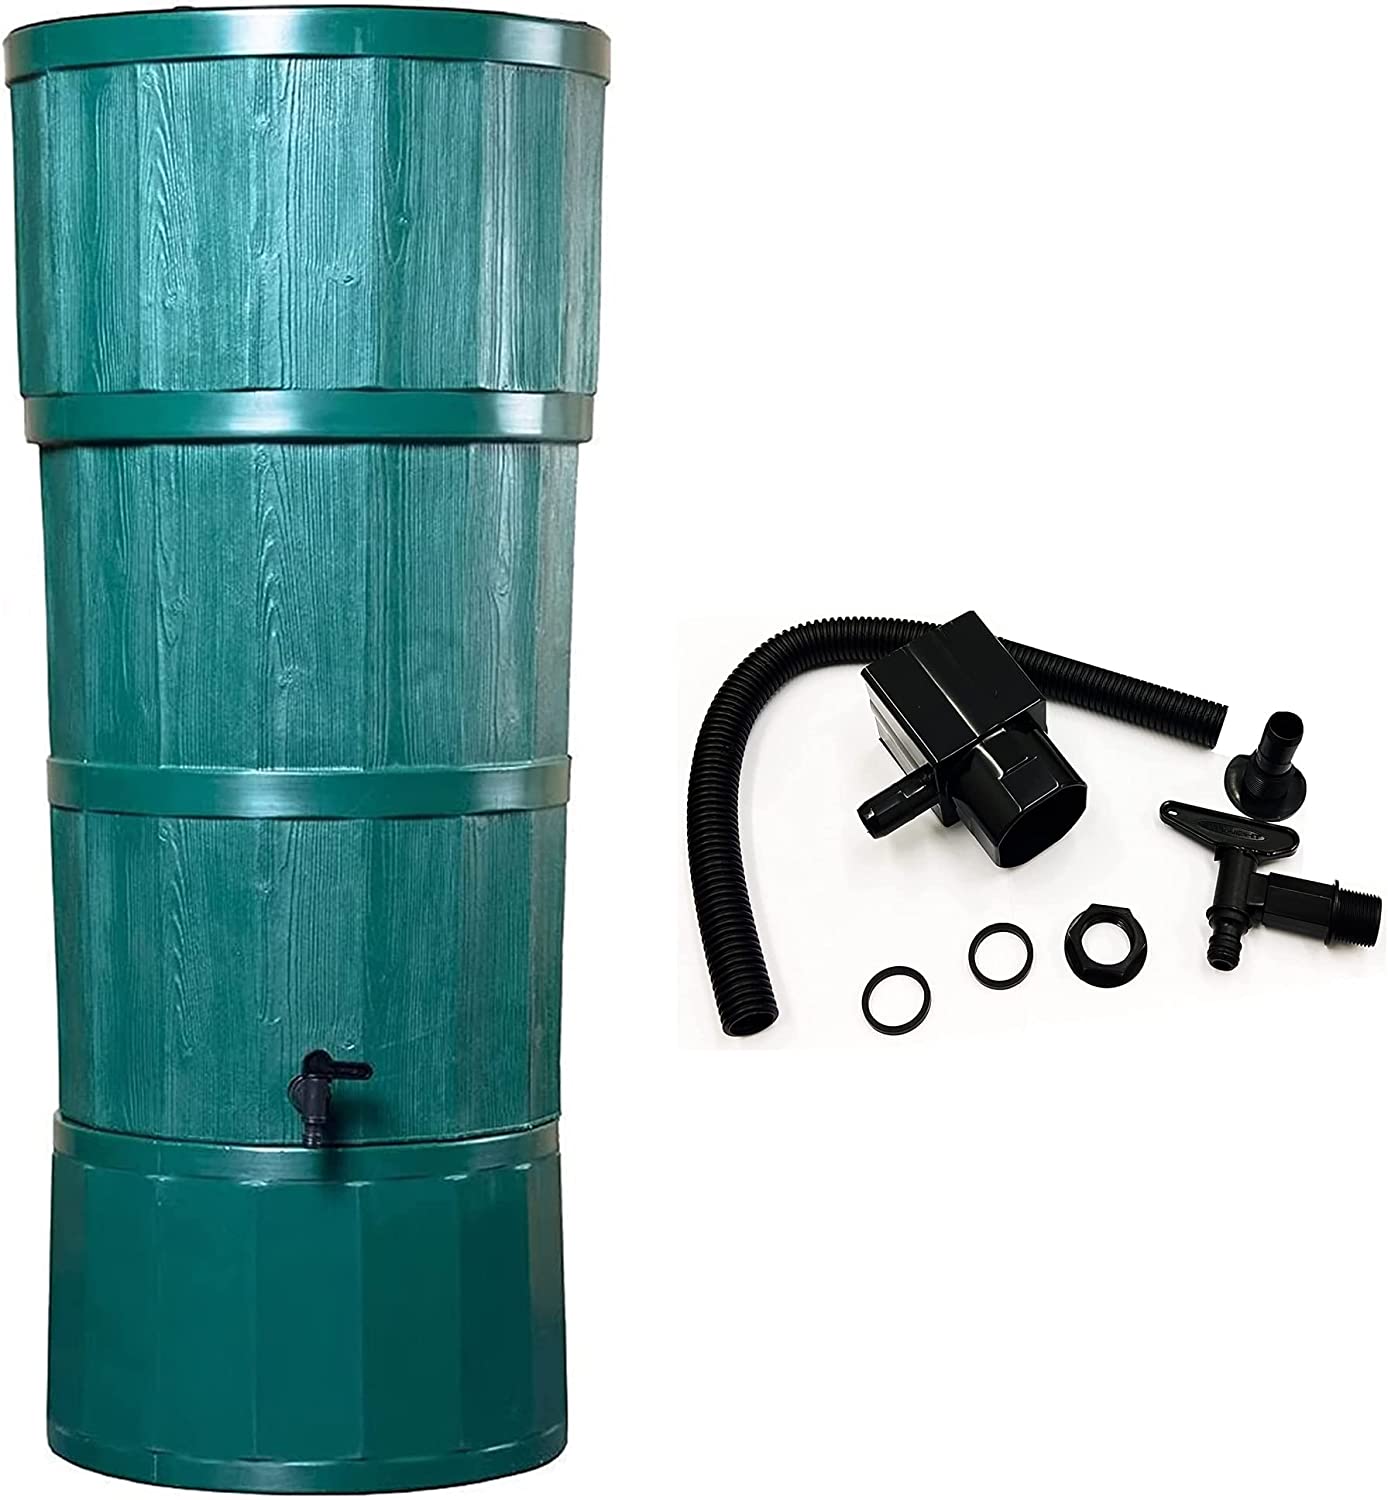 150 Litre Wood Grain Effect Water Butts Rain Collector Complete With Stand Tap Diverter Kit & Lid